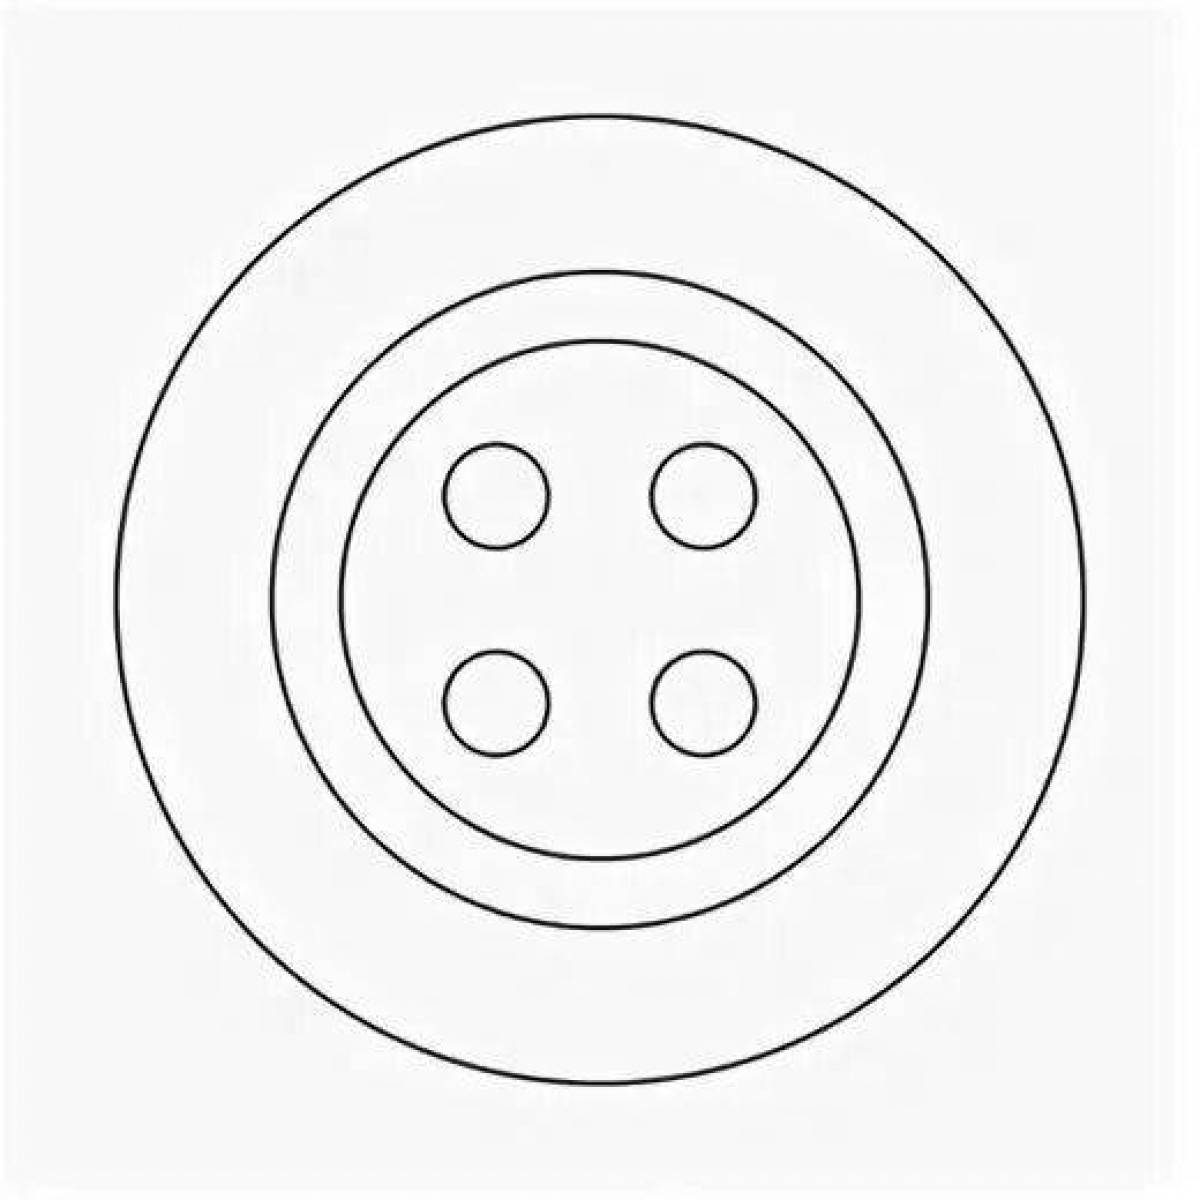 Animated button coloring page